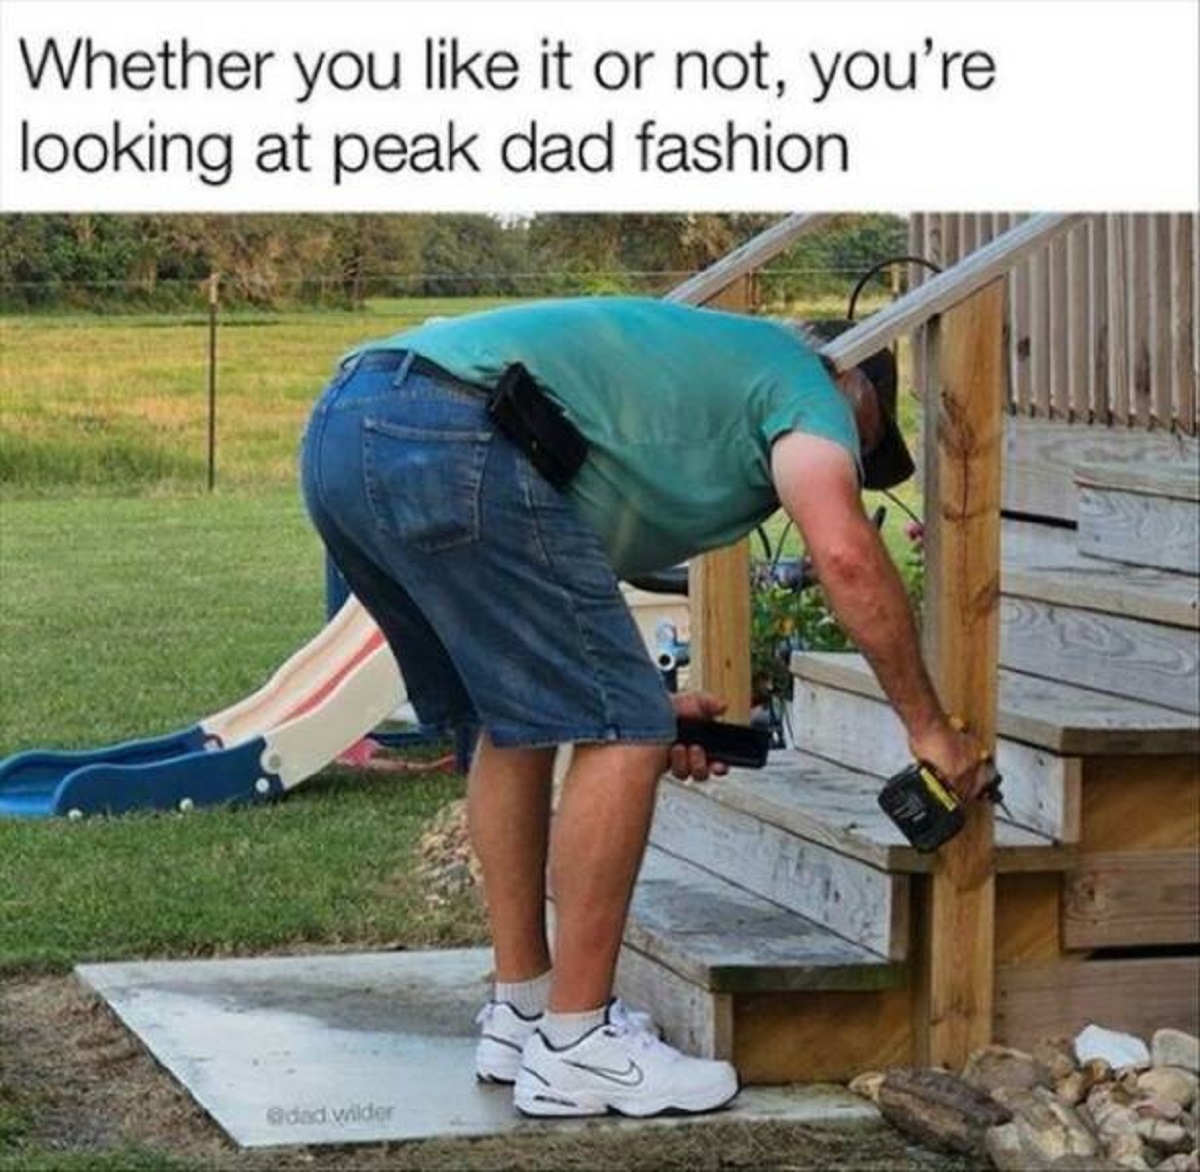 lumber - Whether you it or not, you're looking at peak dad fashion wilder